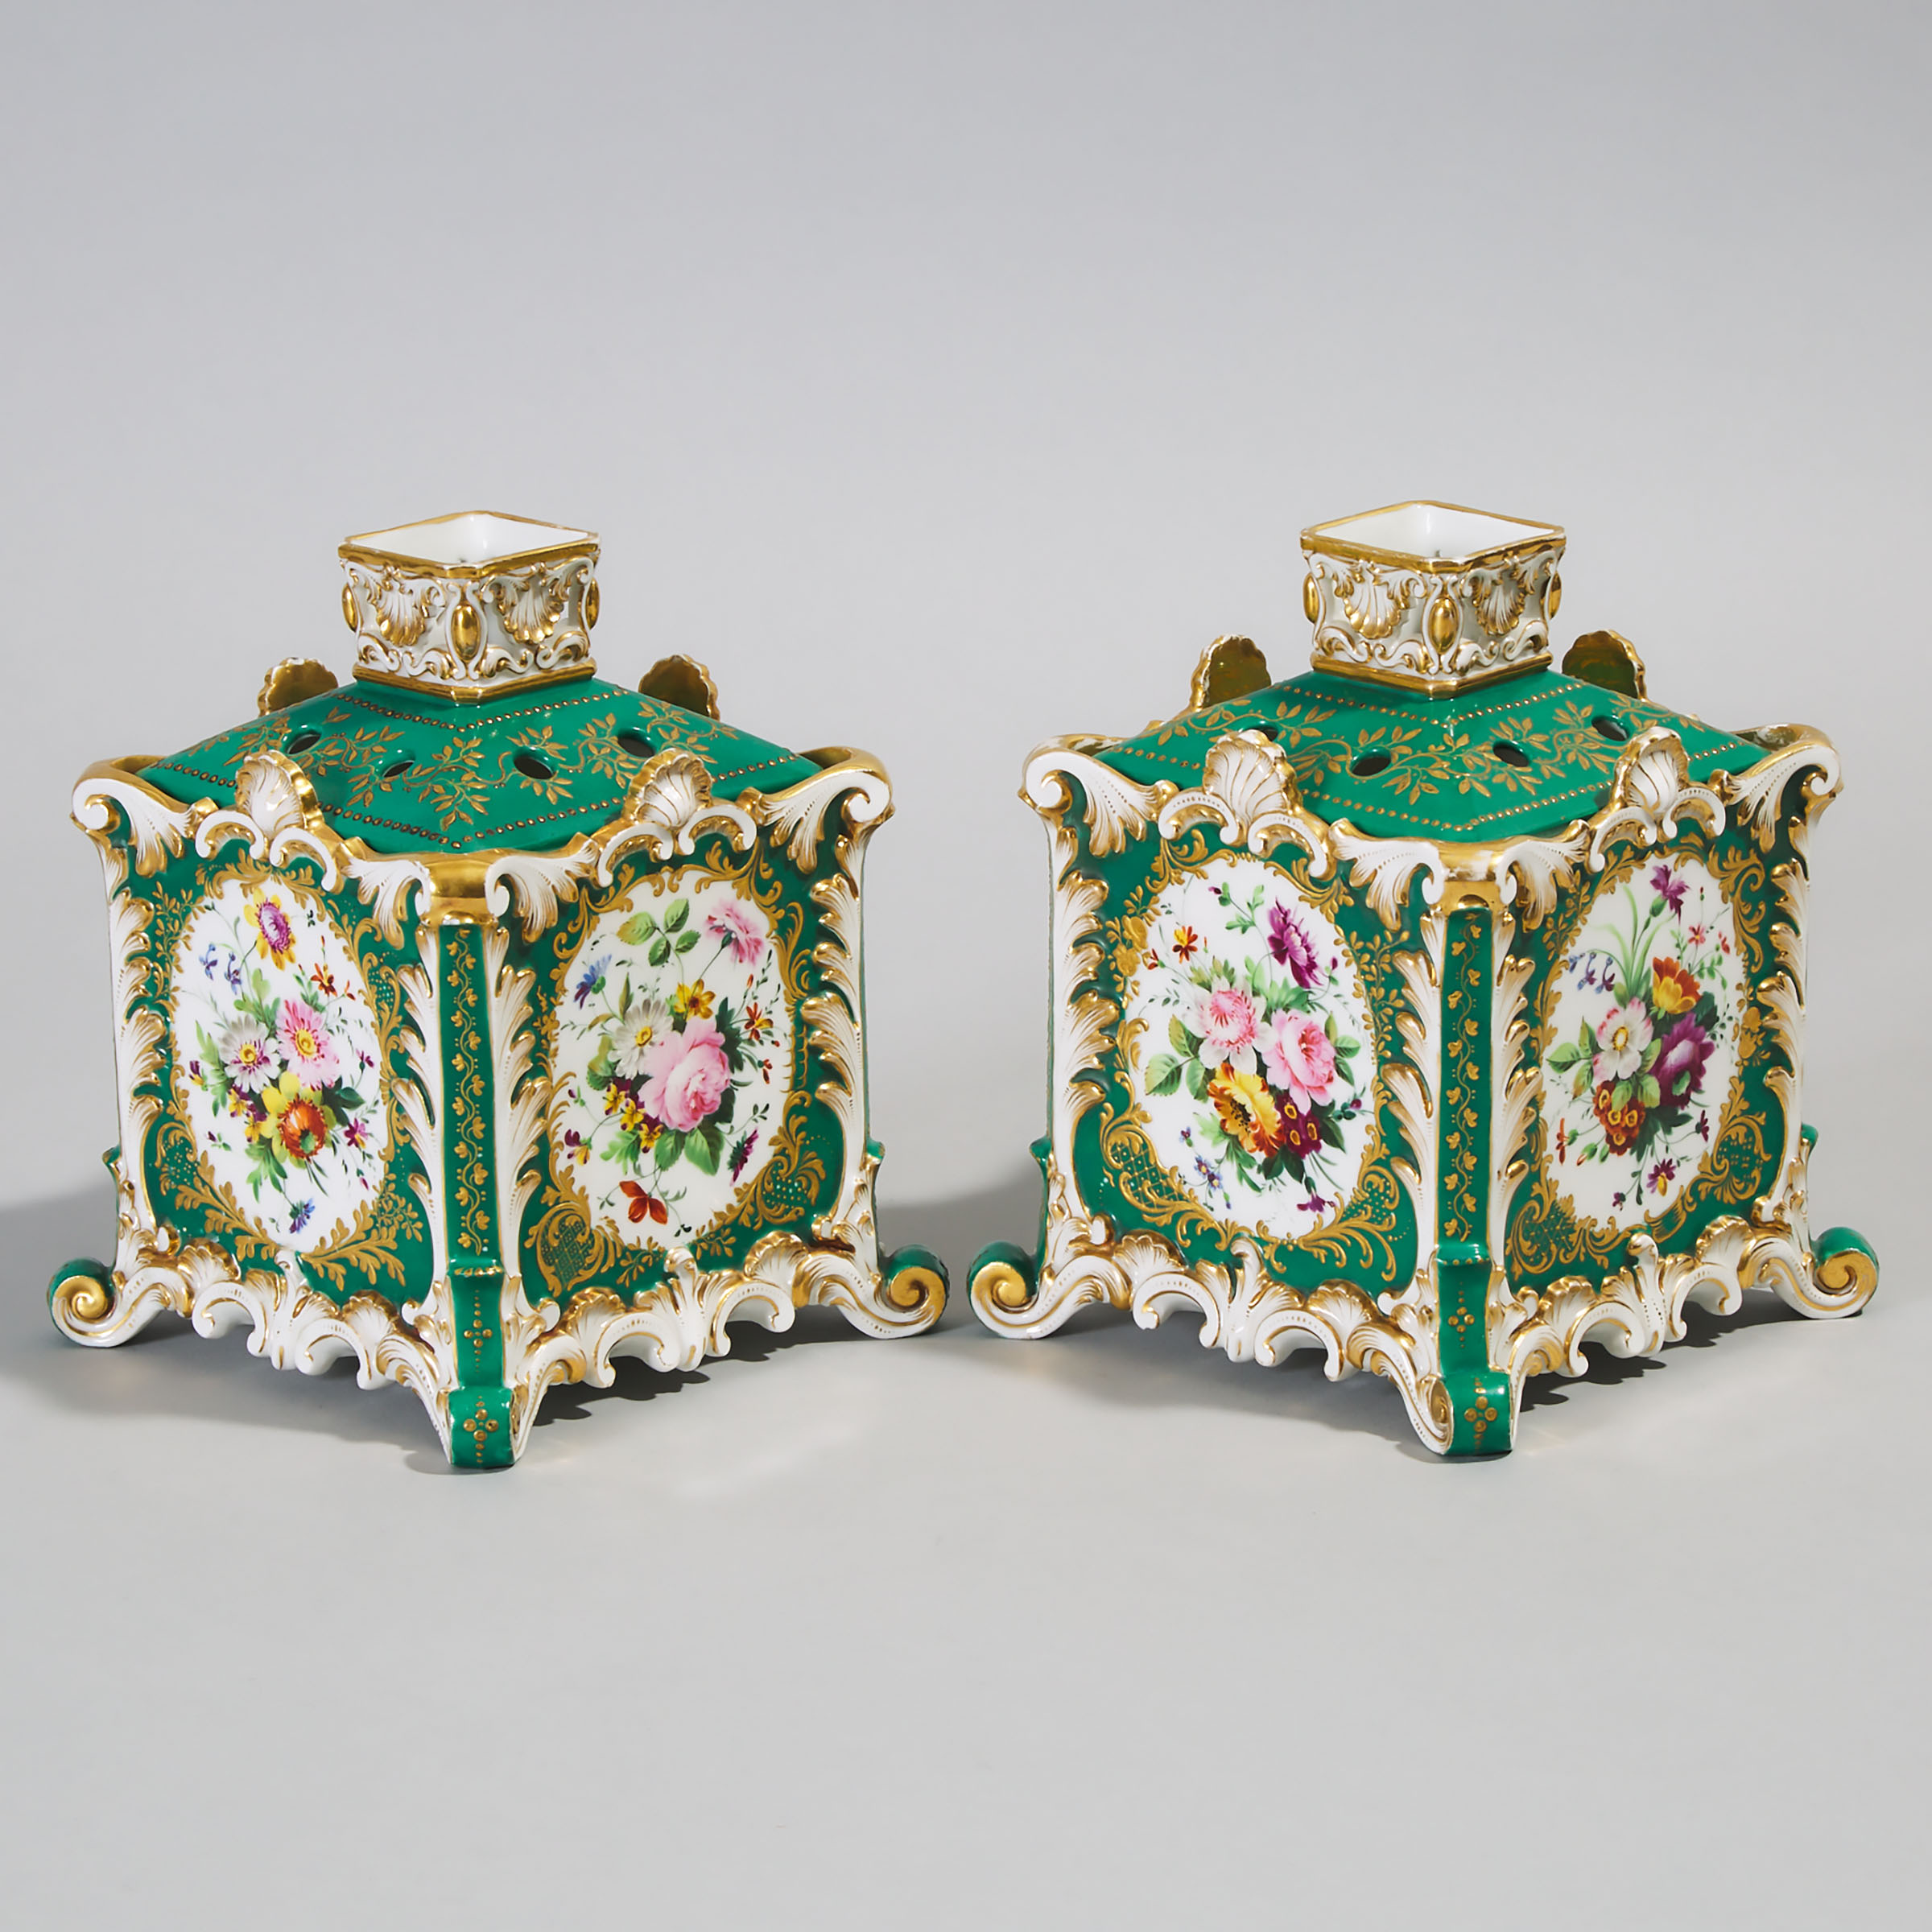 Pair of Jacob Petit Bulb Pots and Covers, mid-19th century